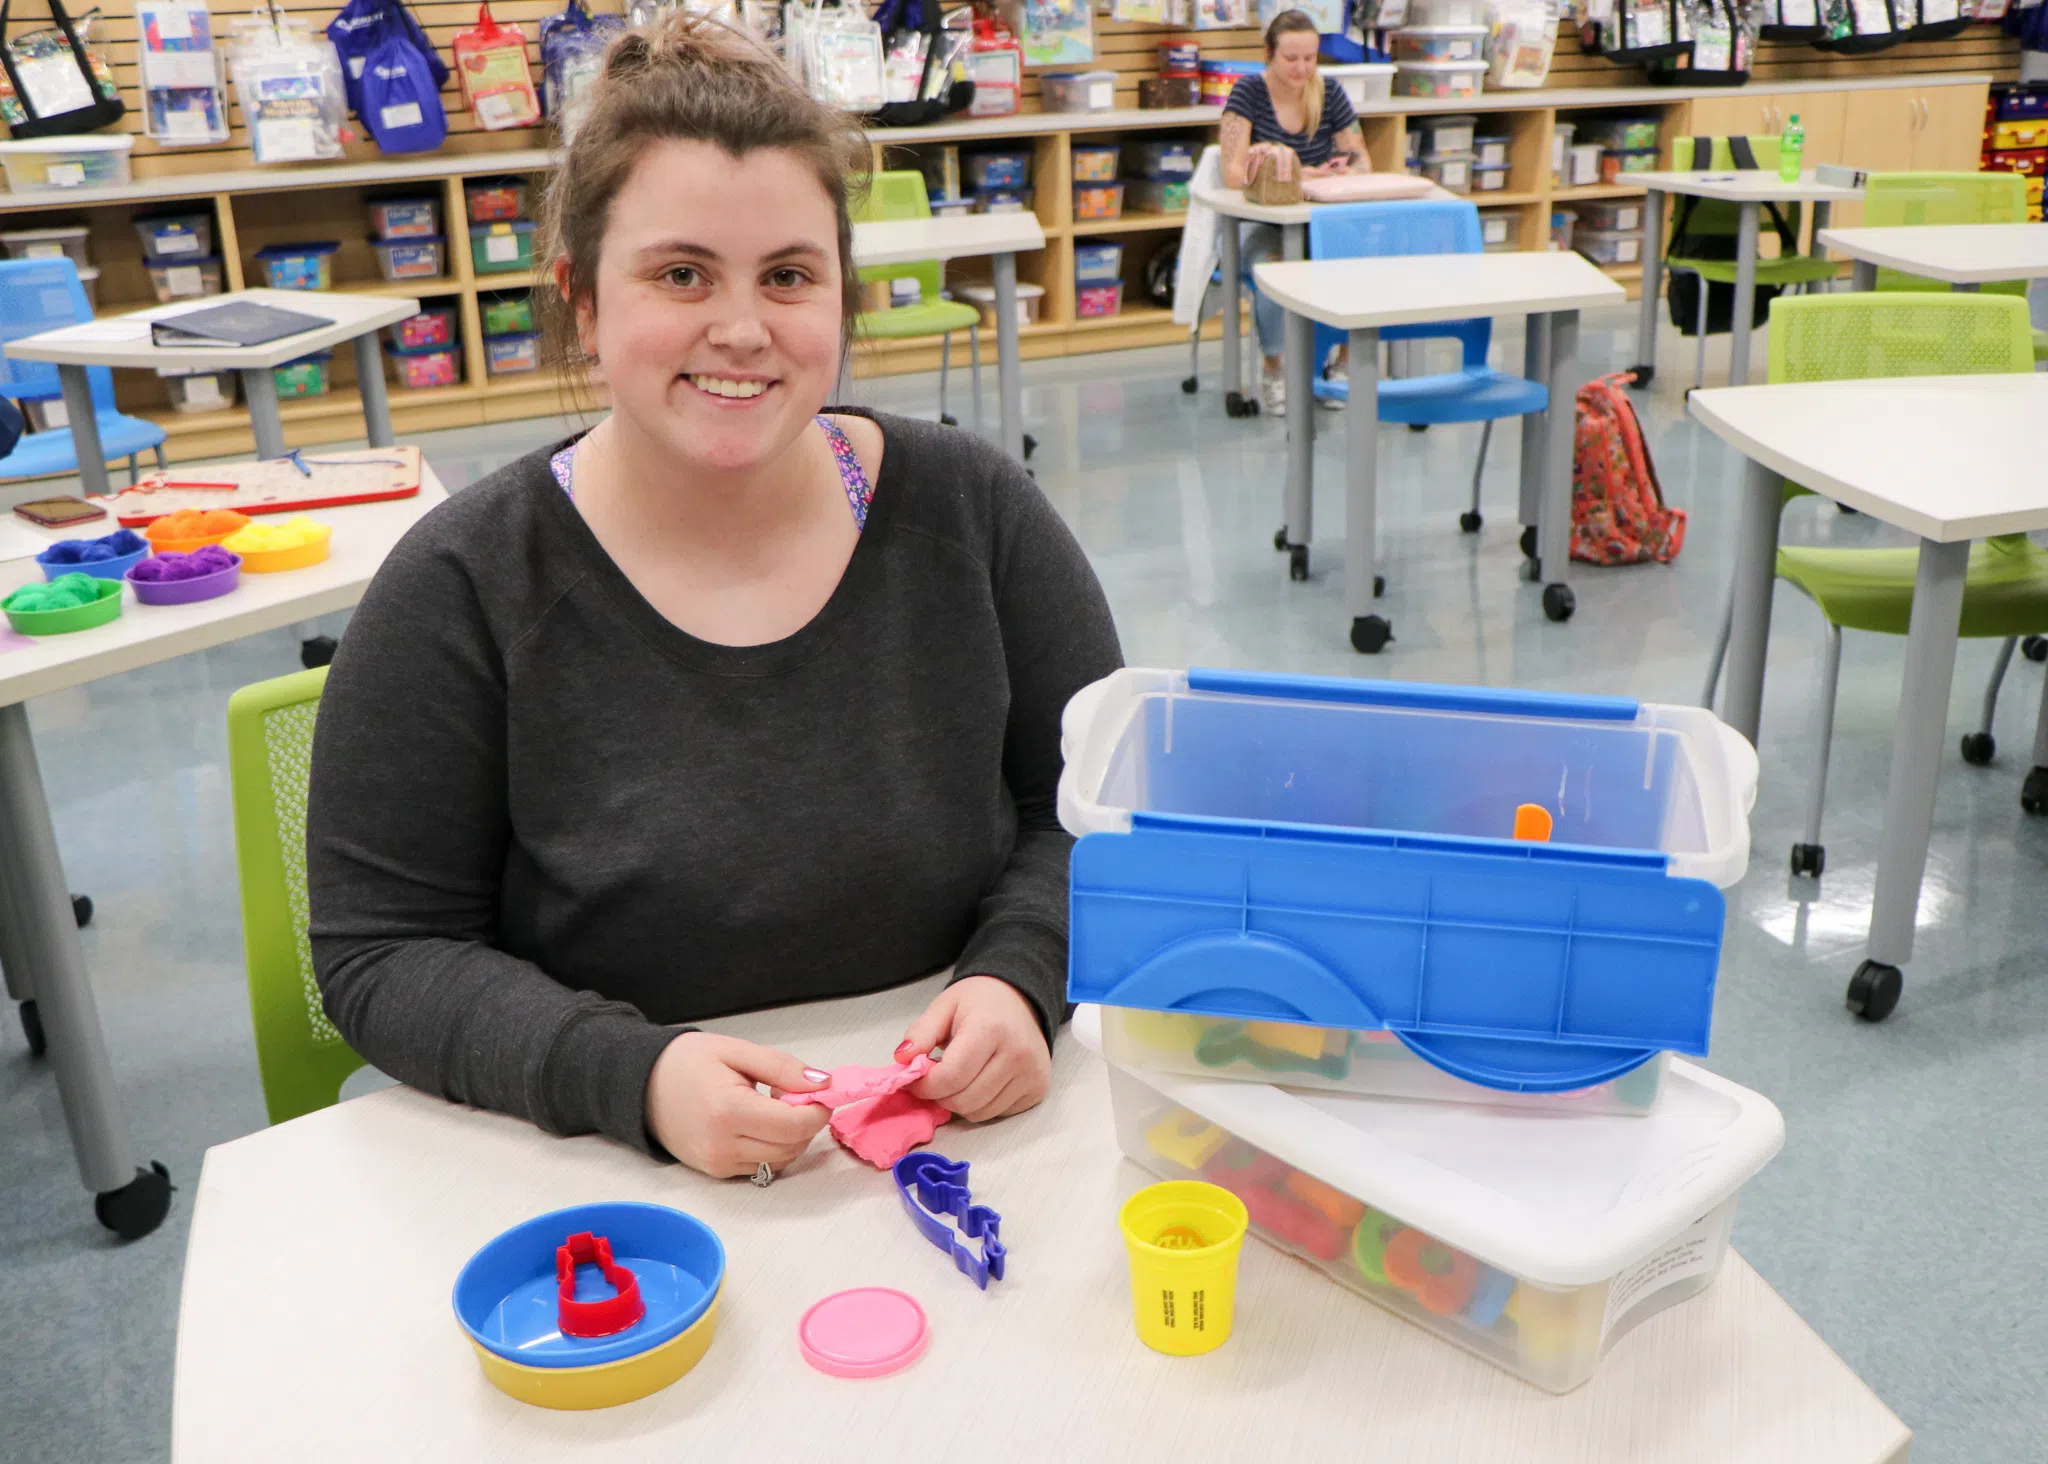 ECTC Interdisciplinary Early Childhood Education student engages with hands-on play activities.  